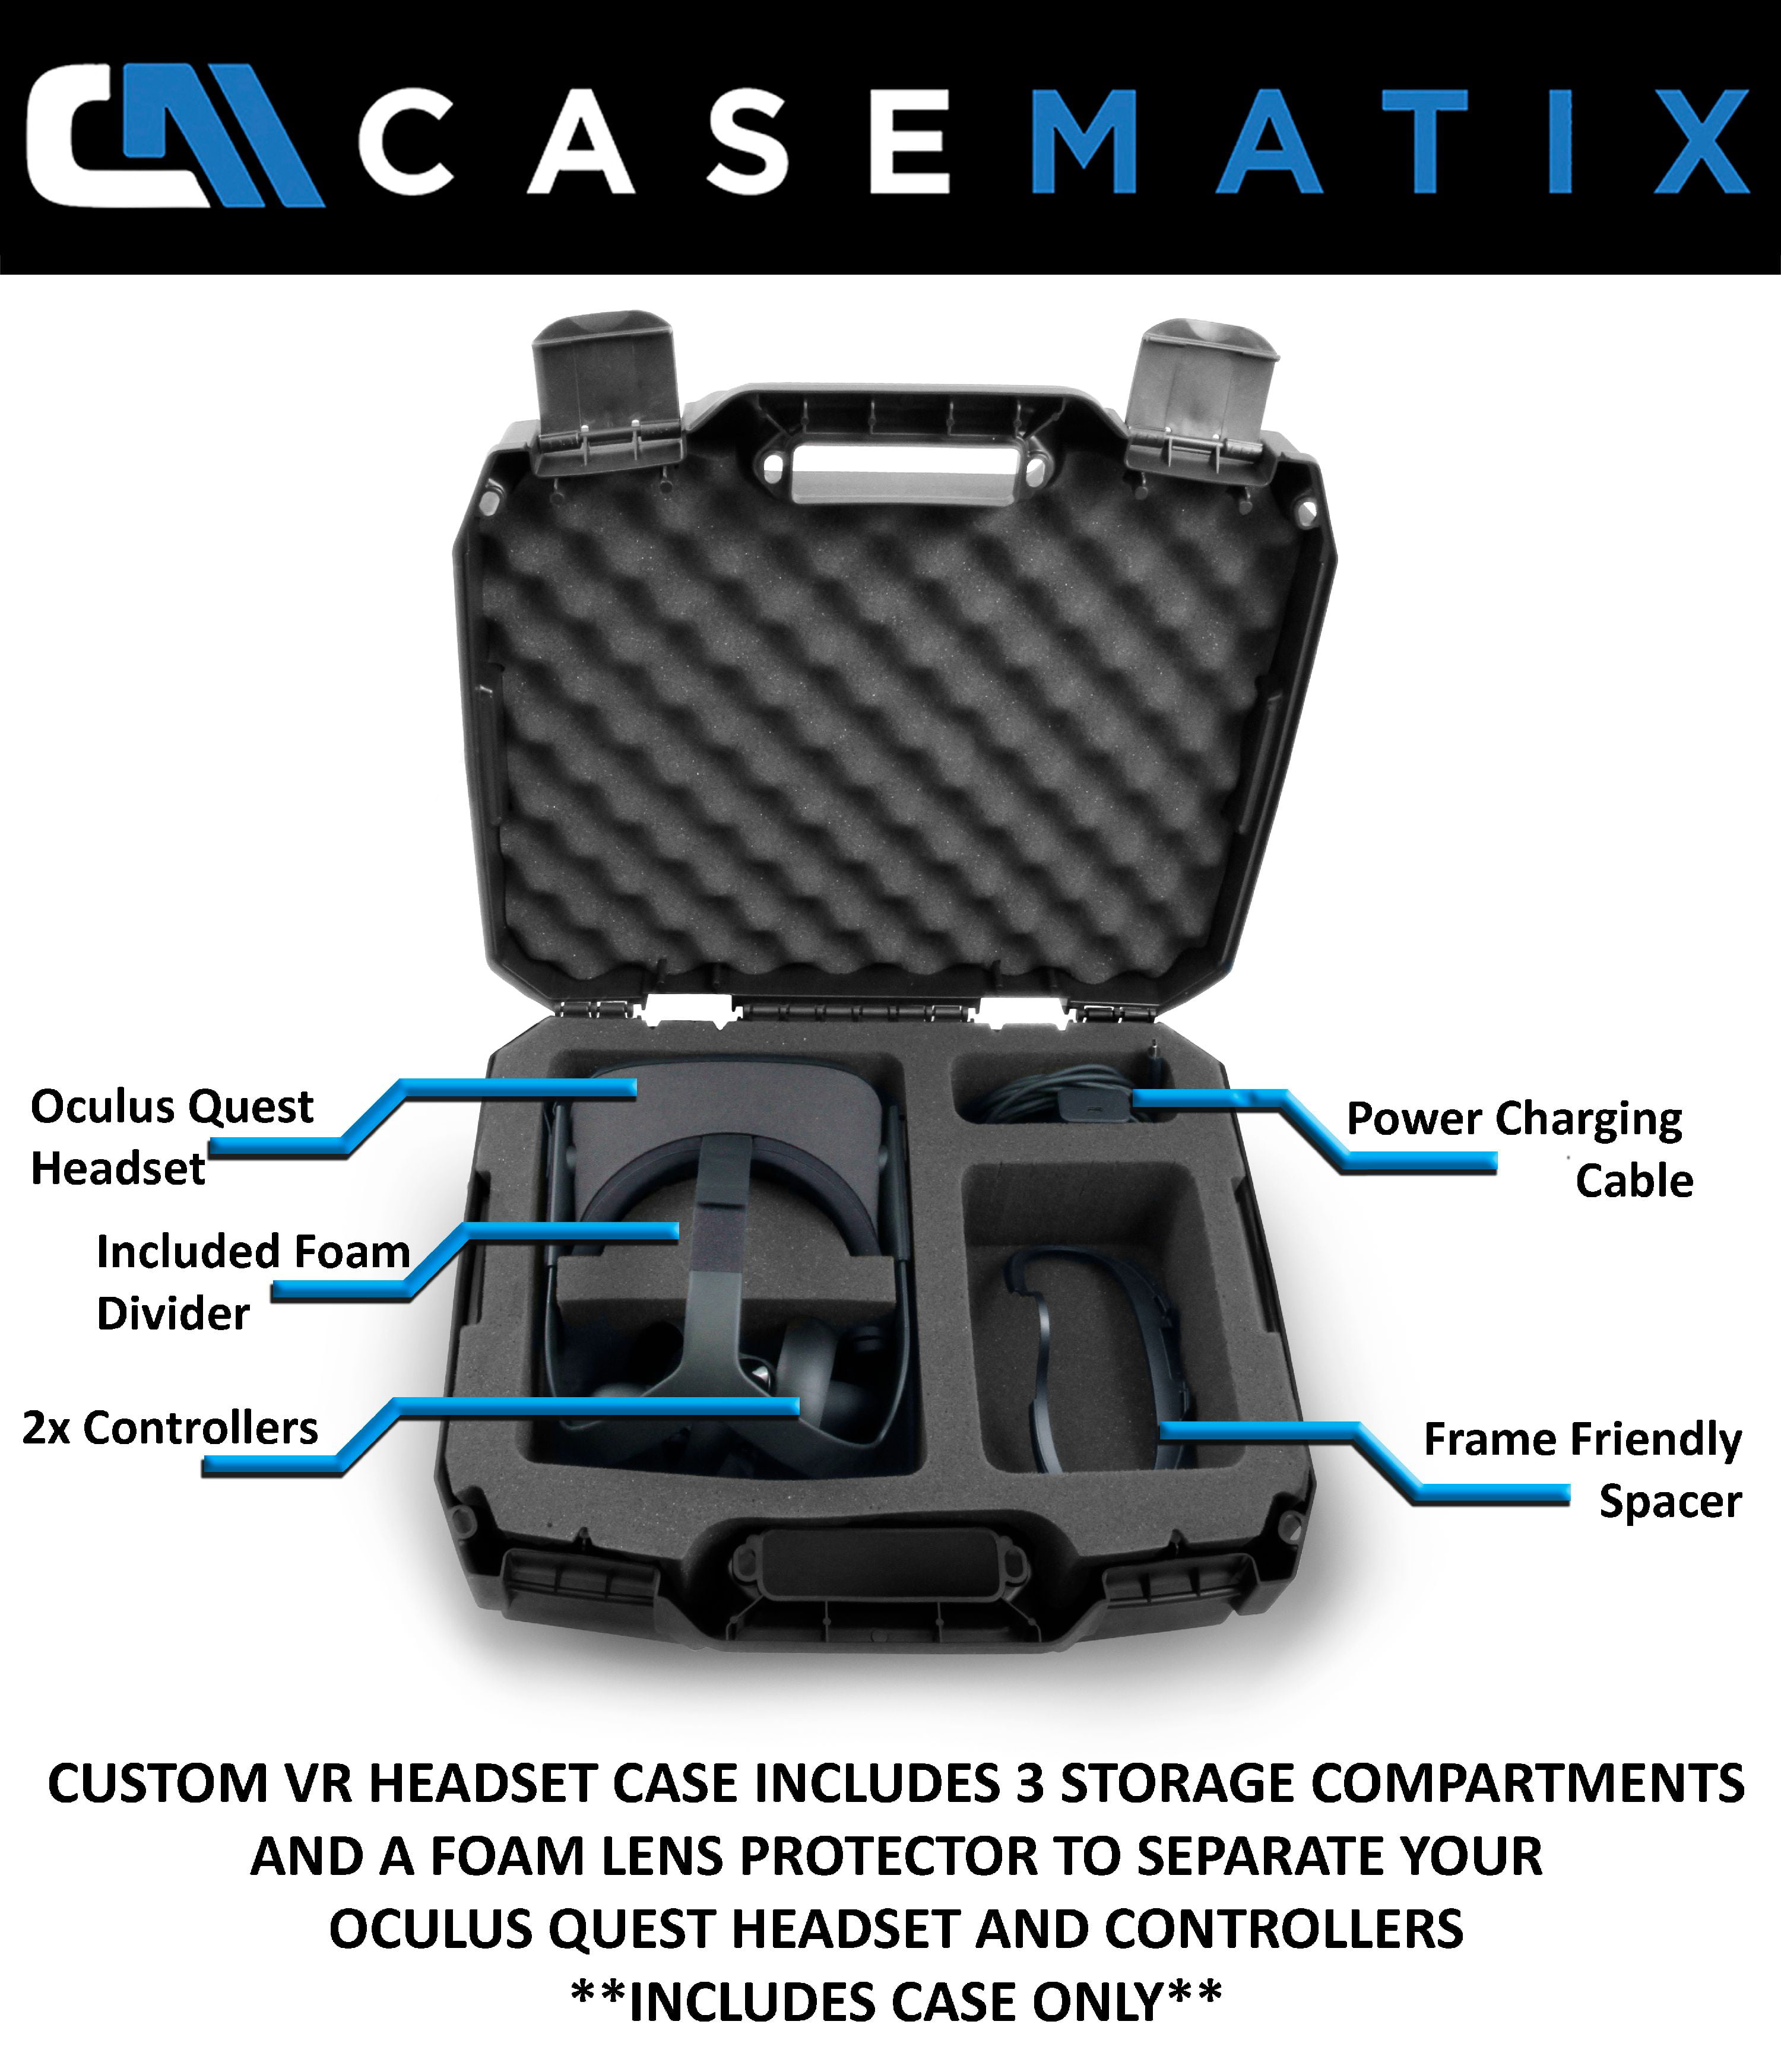 Casematix 18 Inch Waterproof Vr Headset Case Compatible with 2019 Oculus Quest and Controllers in Customizable Foam